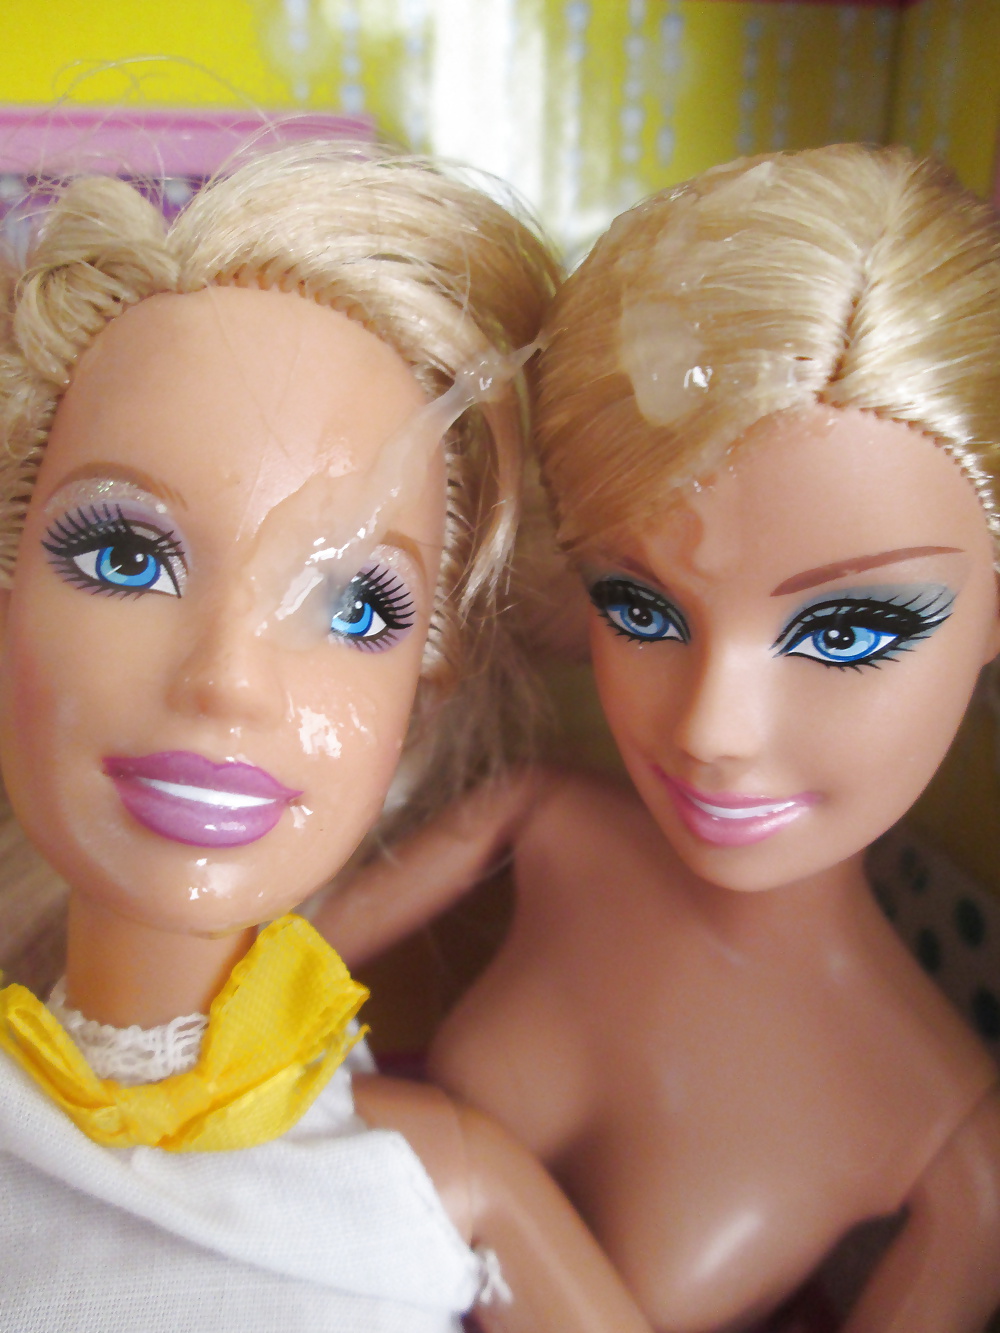 Twin Barbie sisters share a snack.